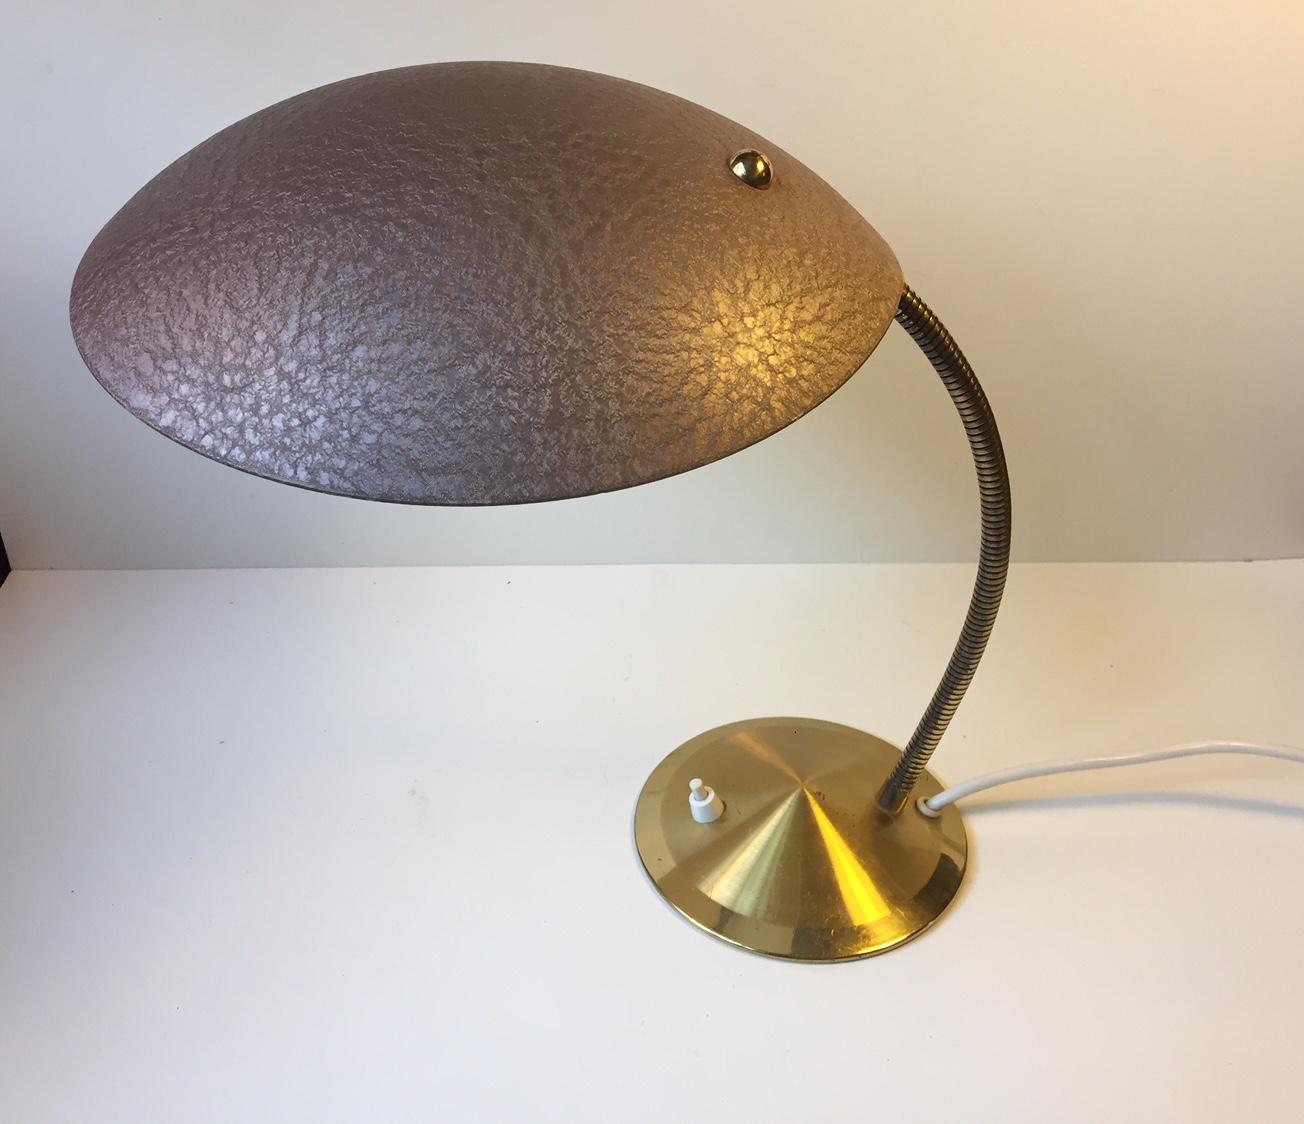 Painted 1950s Adjustable Italian Desk Lamp with Rose Gold Wrinkle Paint & Brass Details